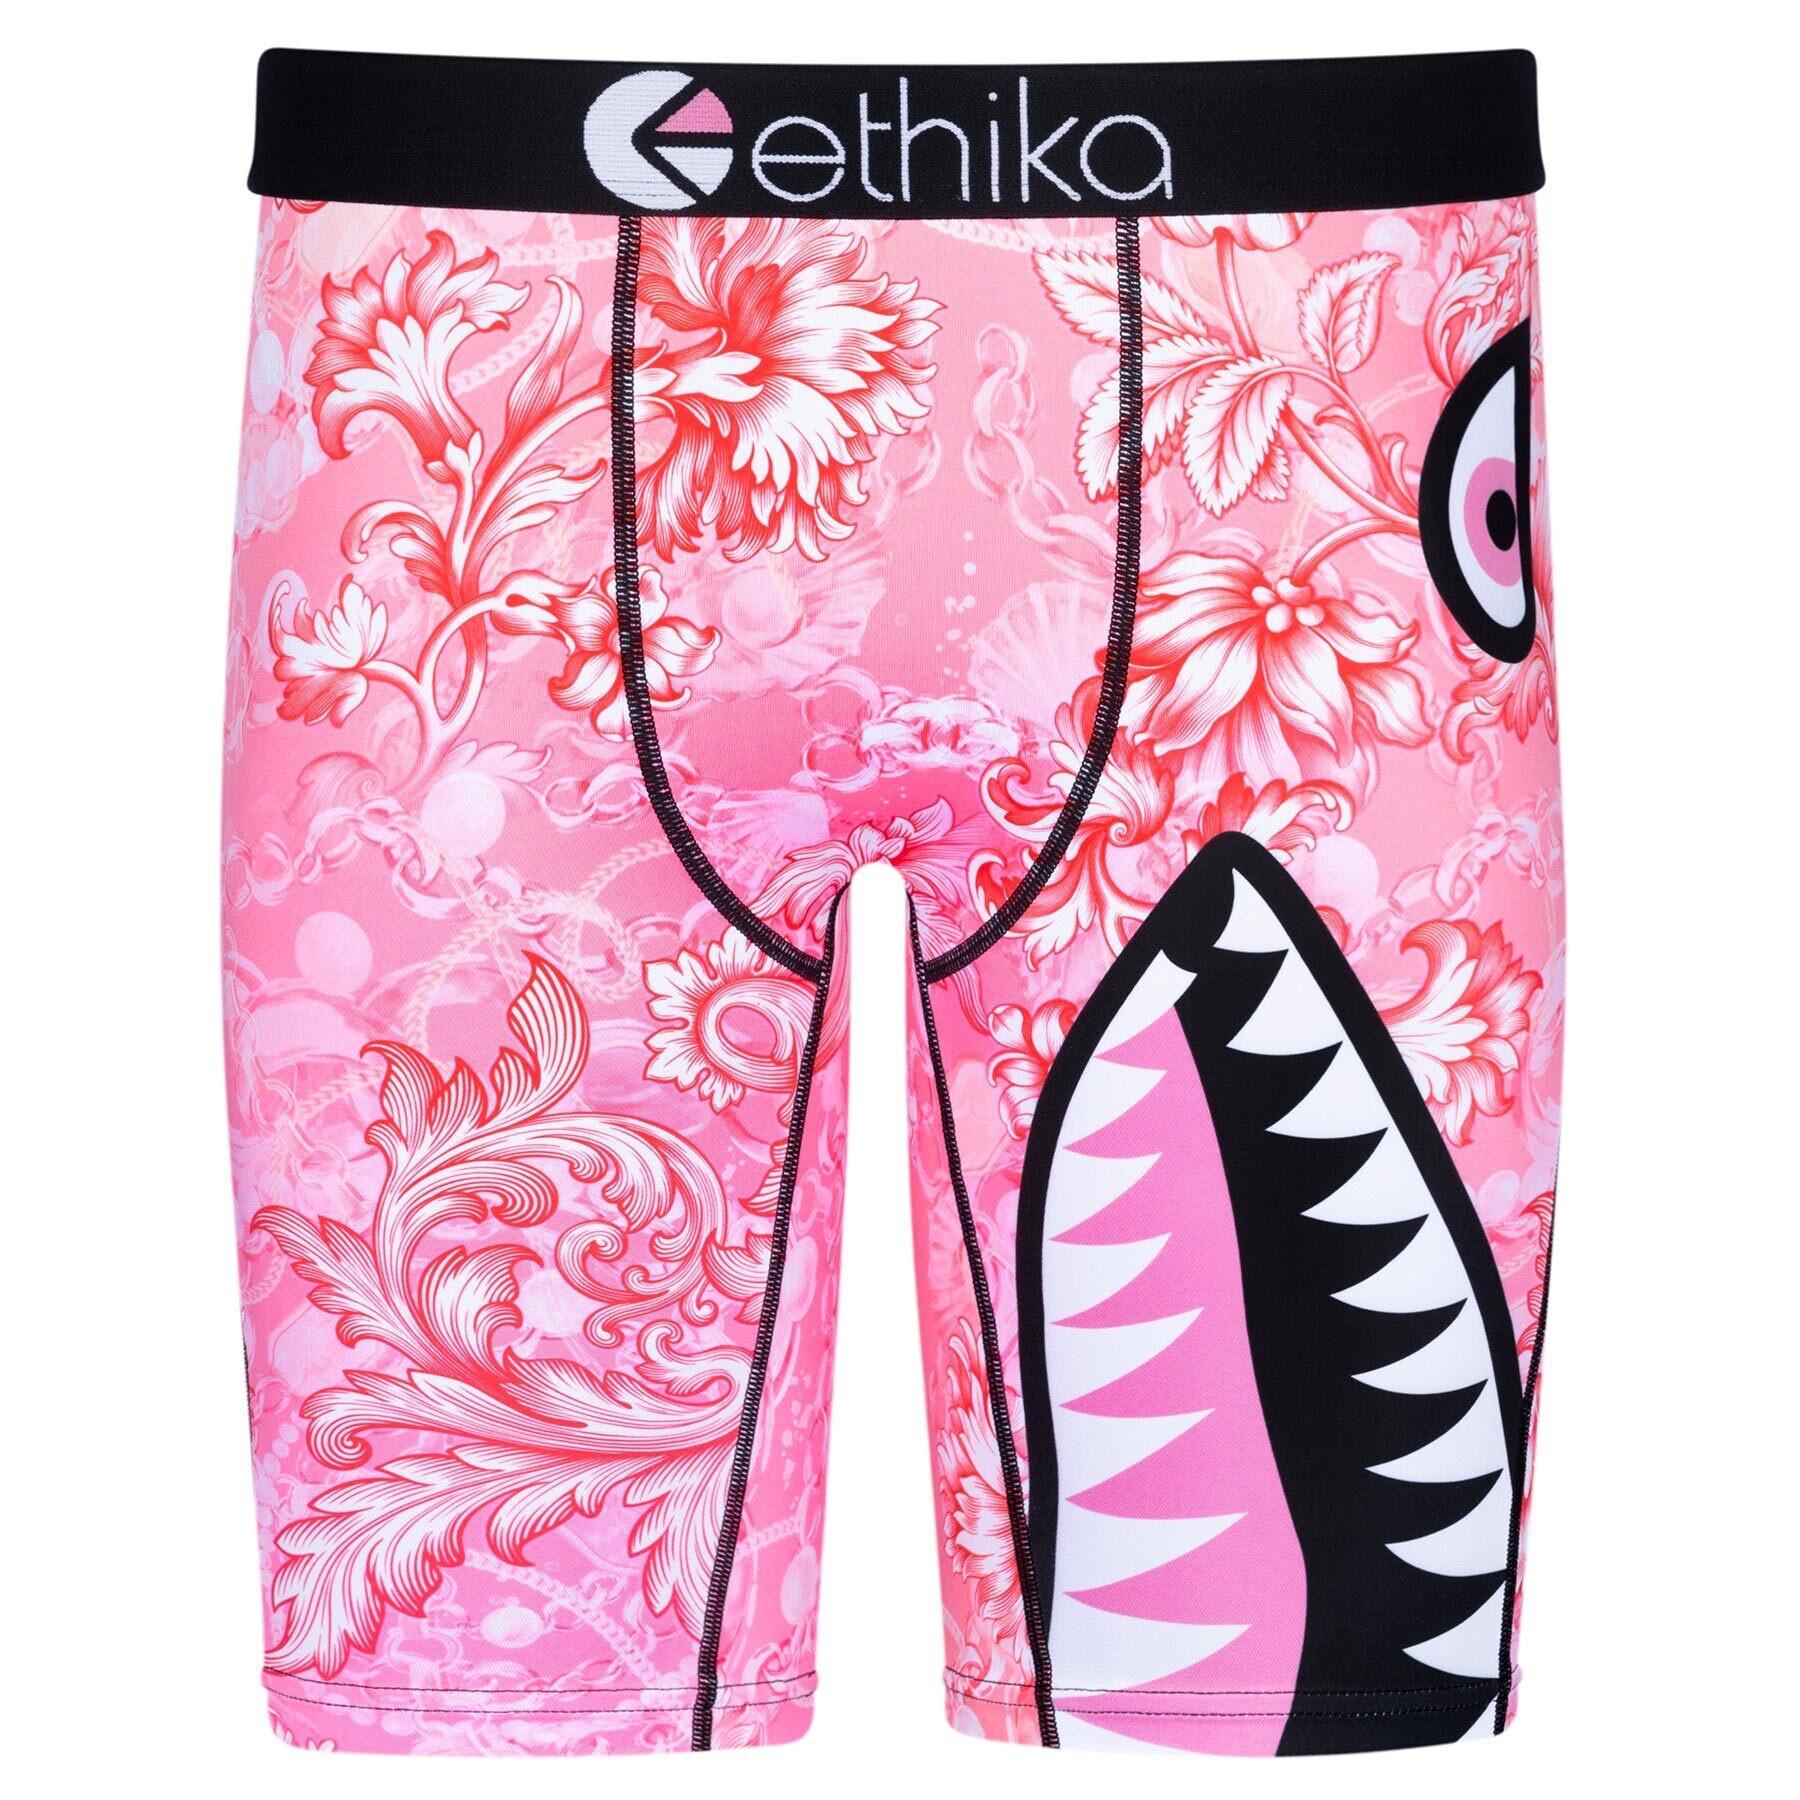 Our Breast Cancer Awareness styles are now live at ethika.com 🩷 A portion  of our Ethika Breast Cancer collection sales will go directl